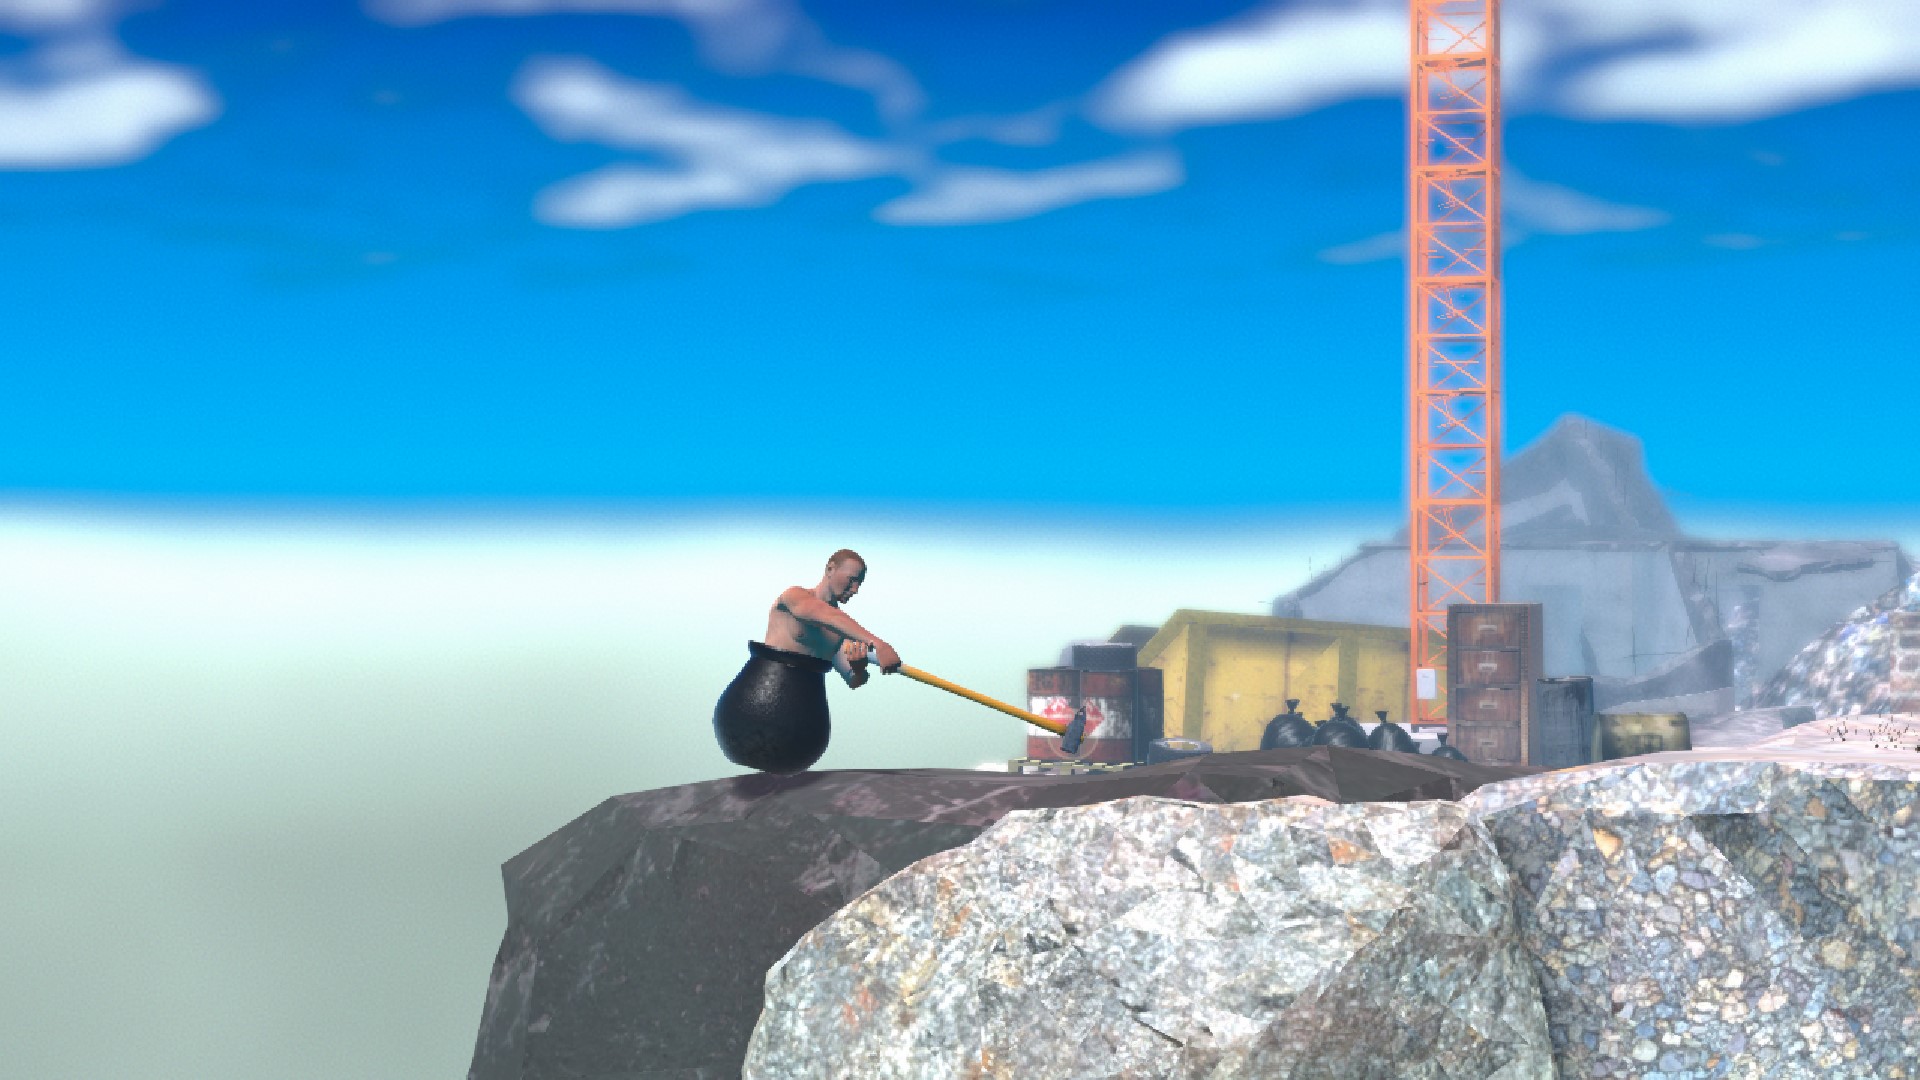 Getting Over It - Players' Reviews